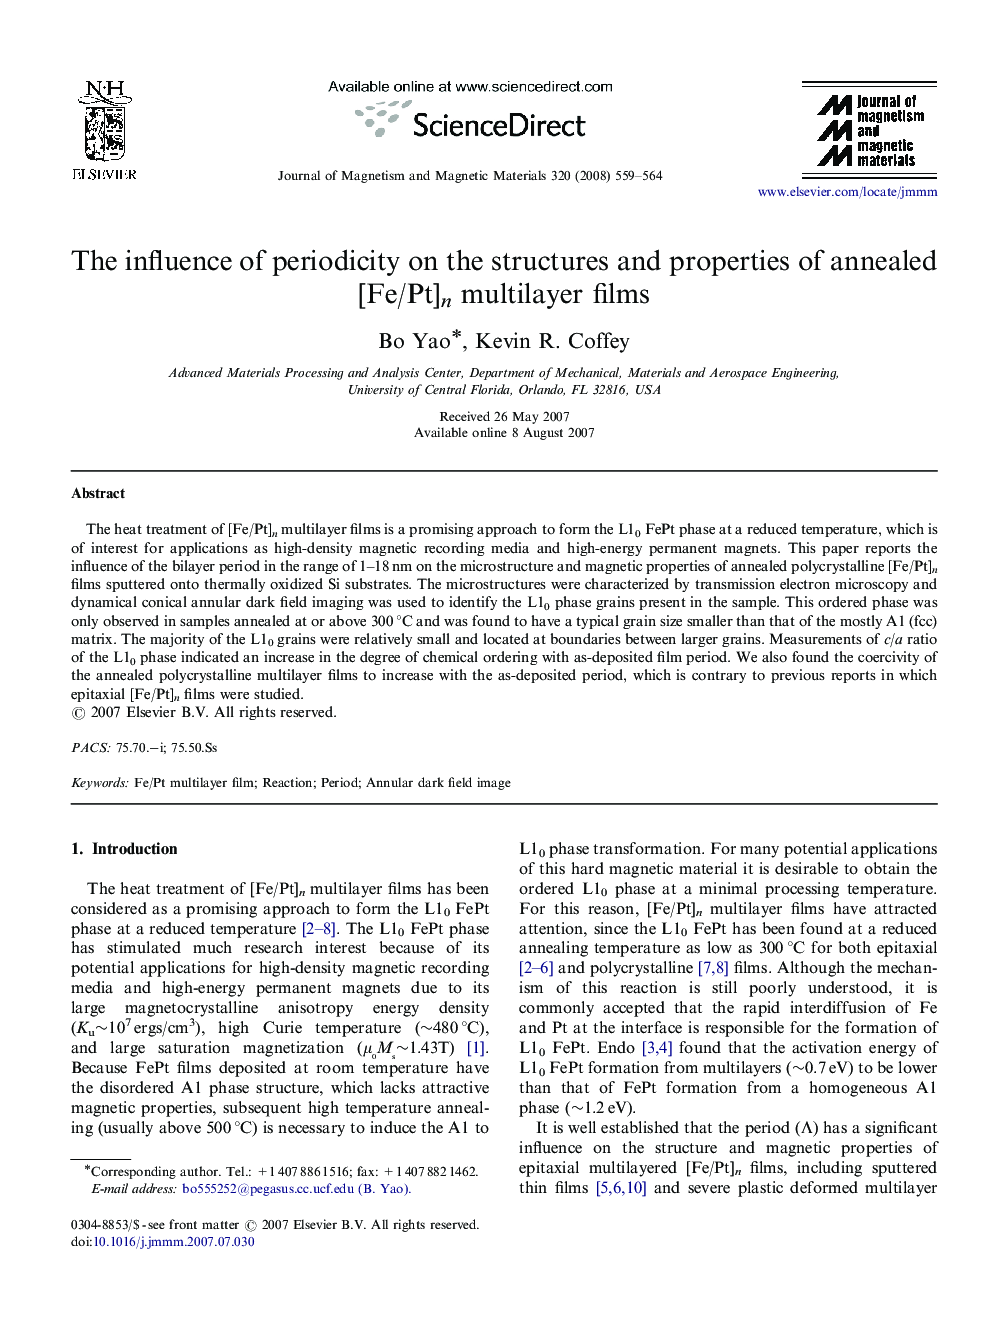 The influence of periodicity on the structures and properties of annealed [Fe/Pt]n multilayer films